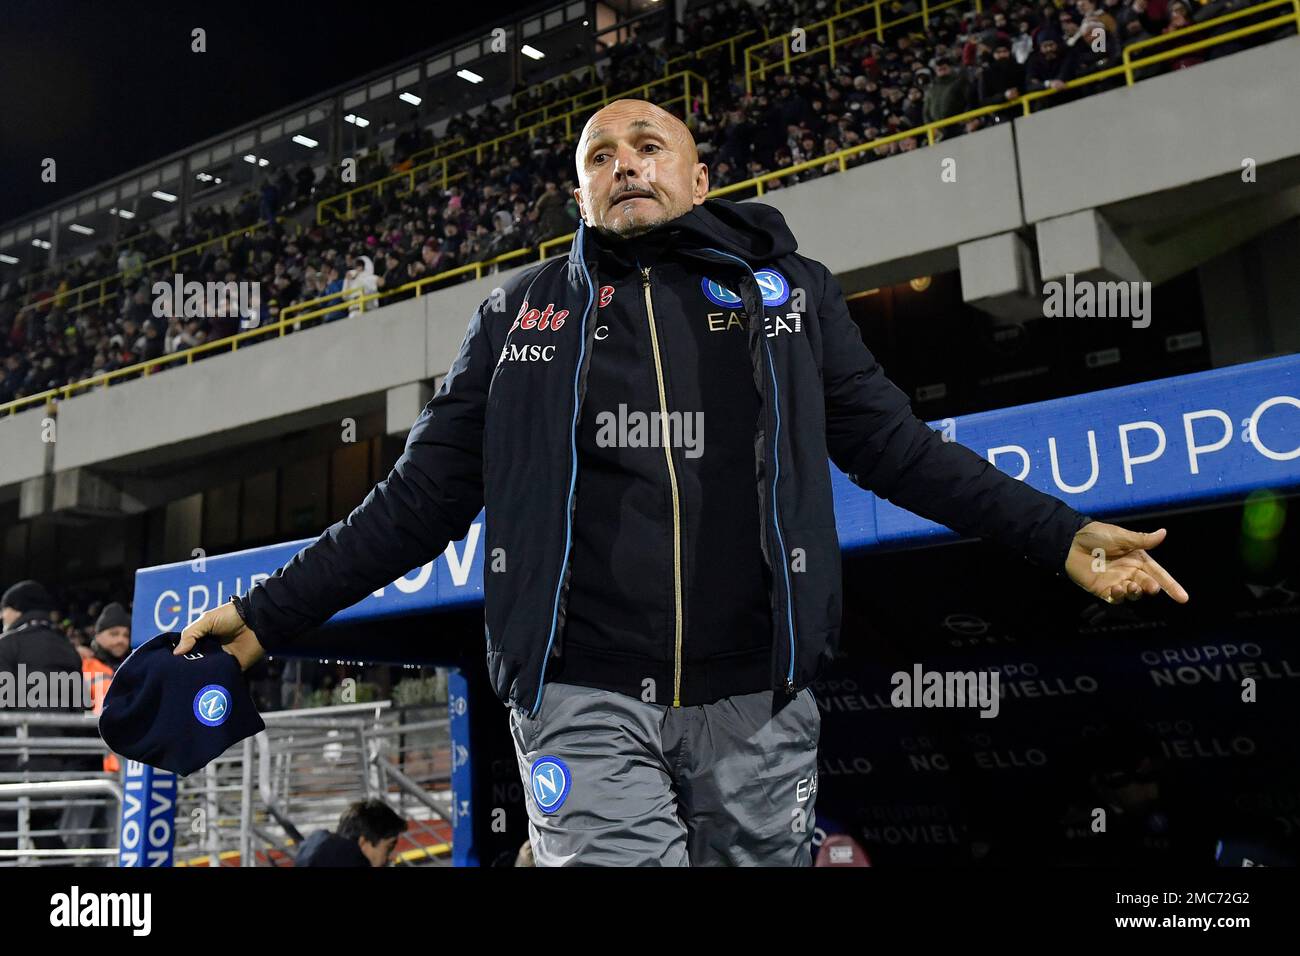 Salerno, Italy. 21st Jan, 2023. Luciano Spalletti head coach of SSC Napoli during the Serie A football match between US Salernitana and SSC Napoli at Arechi stadium in Salerno (Italy), January 21st, 2023. Photo Andrea Staccioli/ Insidefoto Credit: Insidefoto di andrea staccioli/Alamy Live News Stock Photo